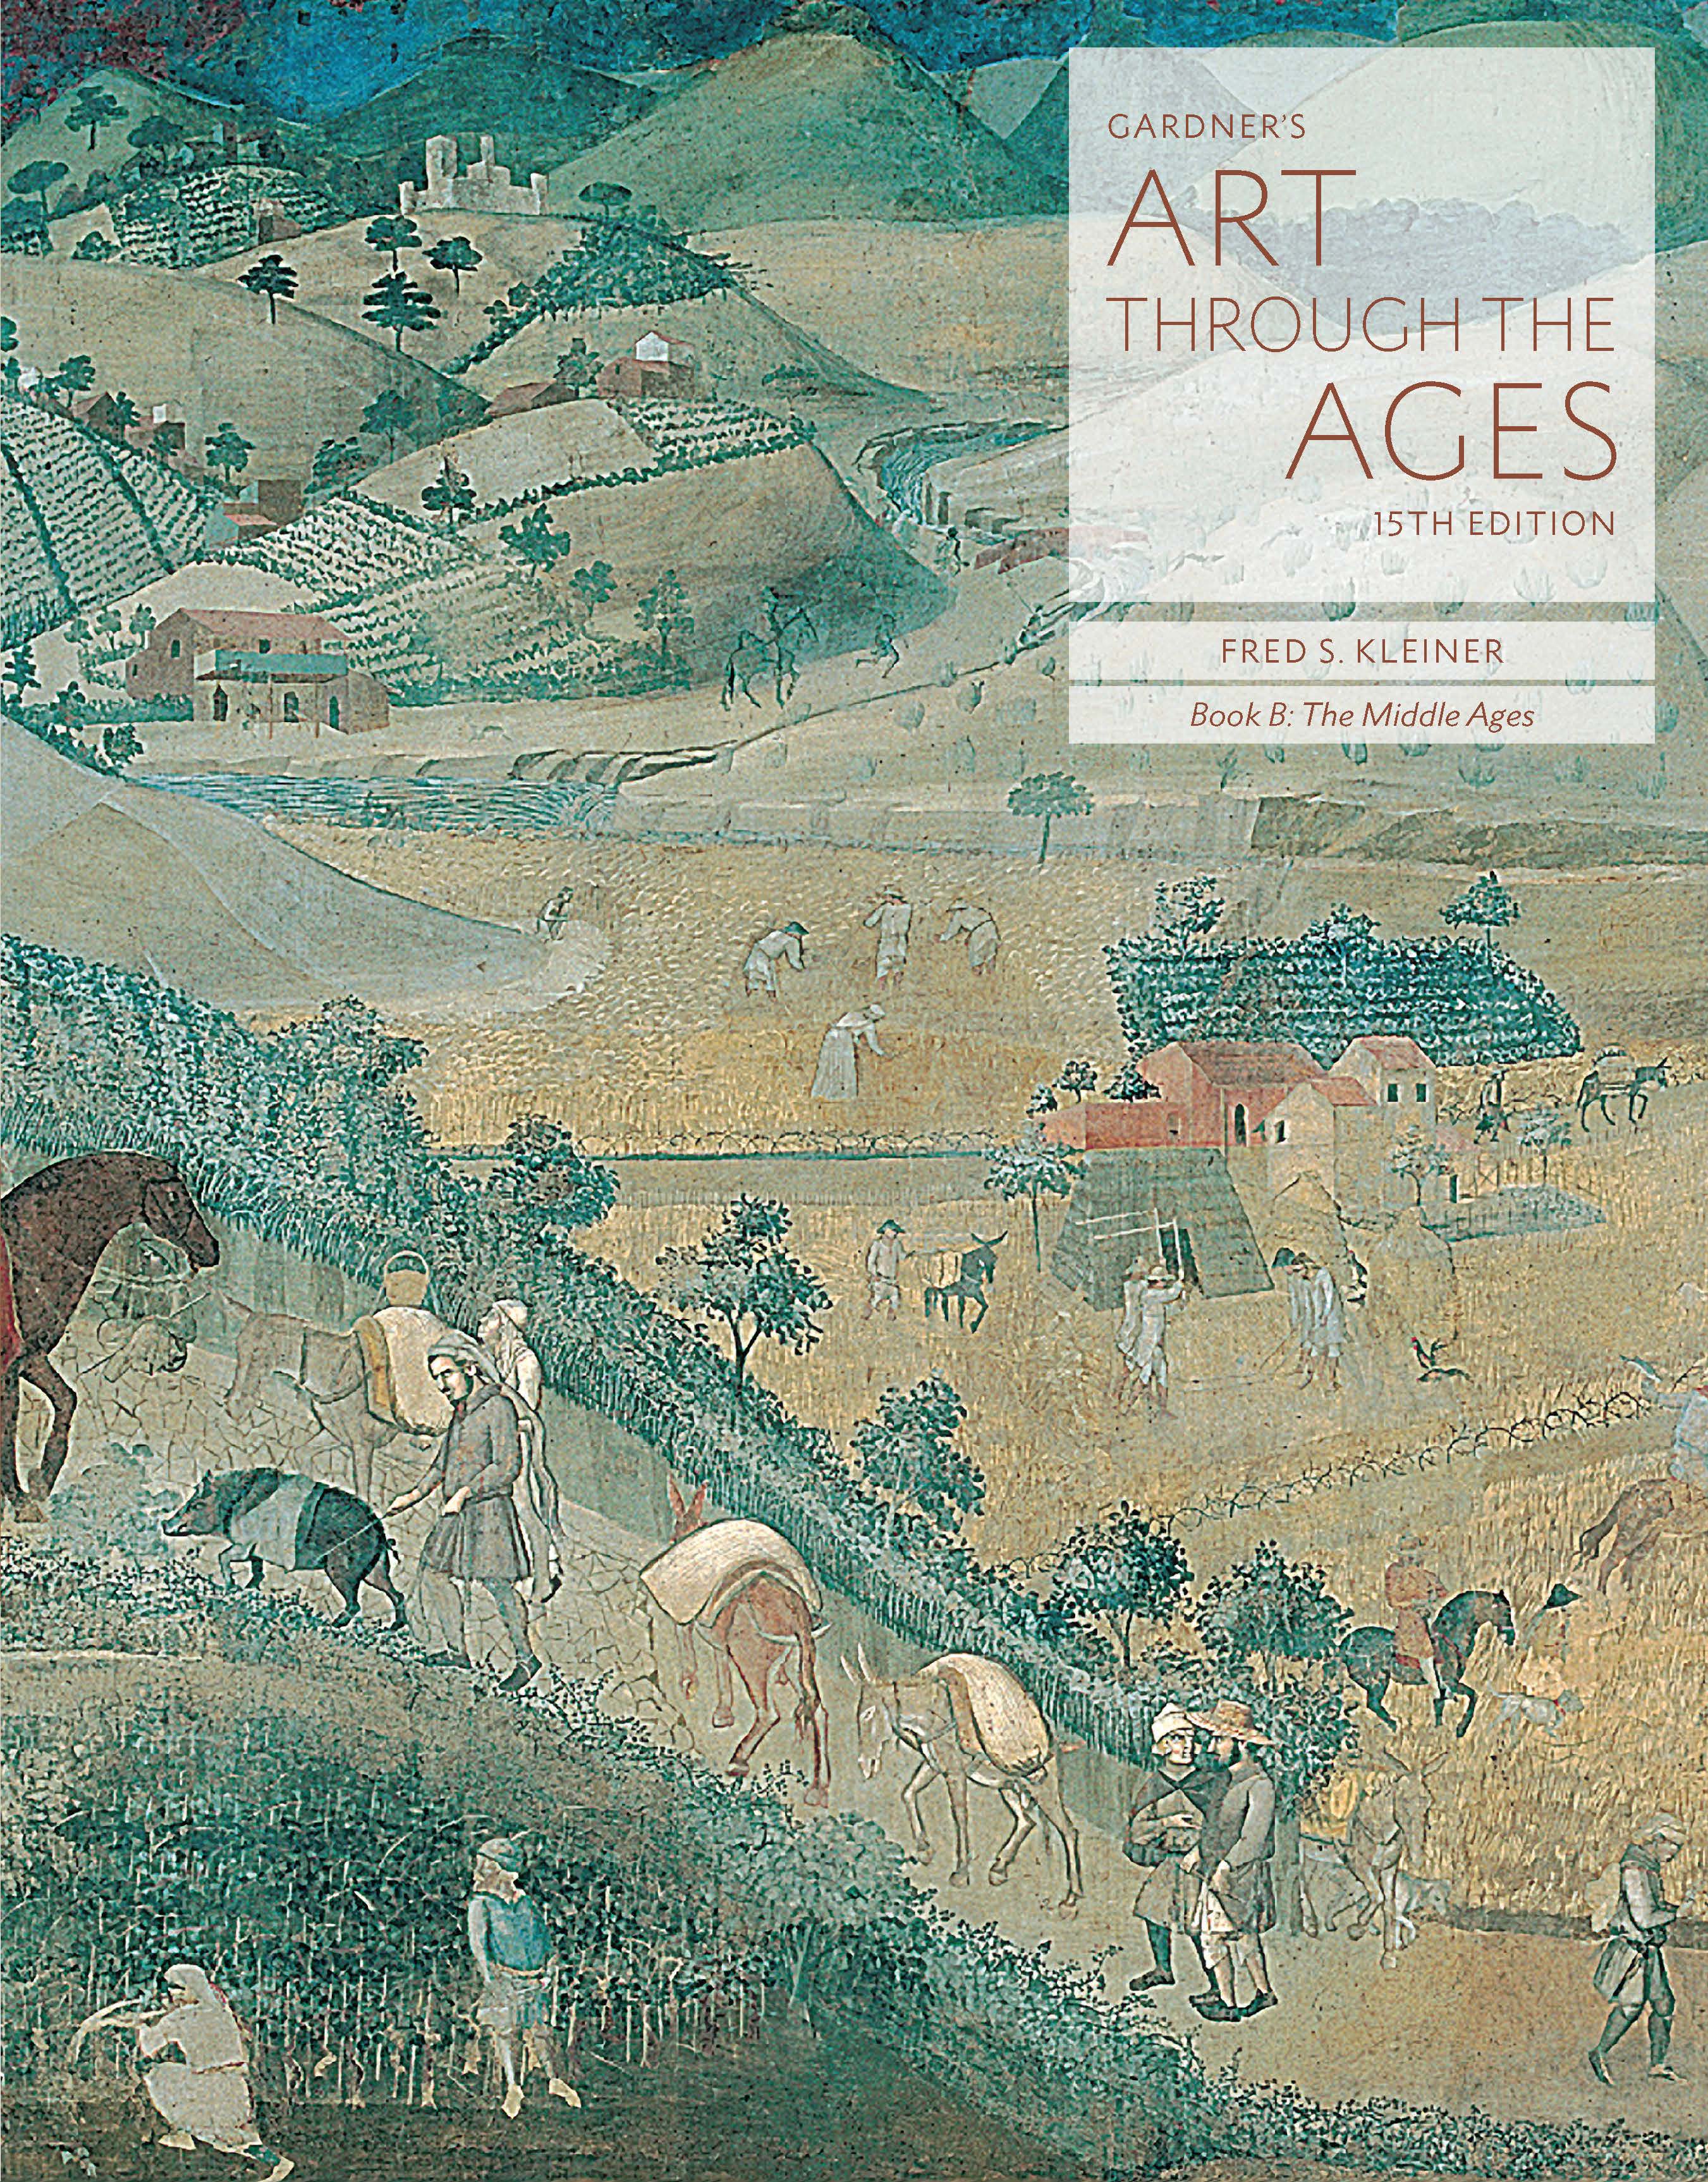 Gardners-art-through-the-ages-15th-edition-pdf